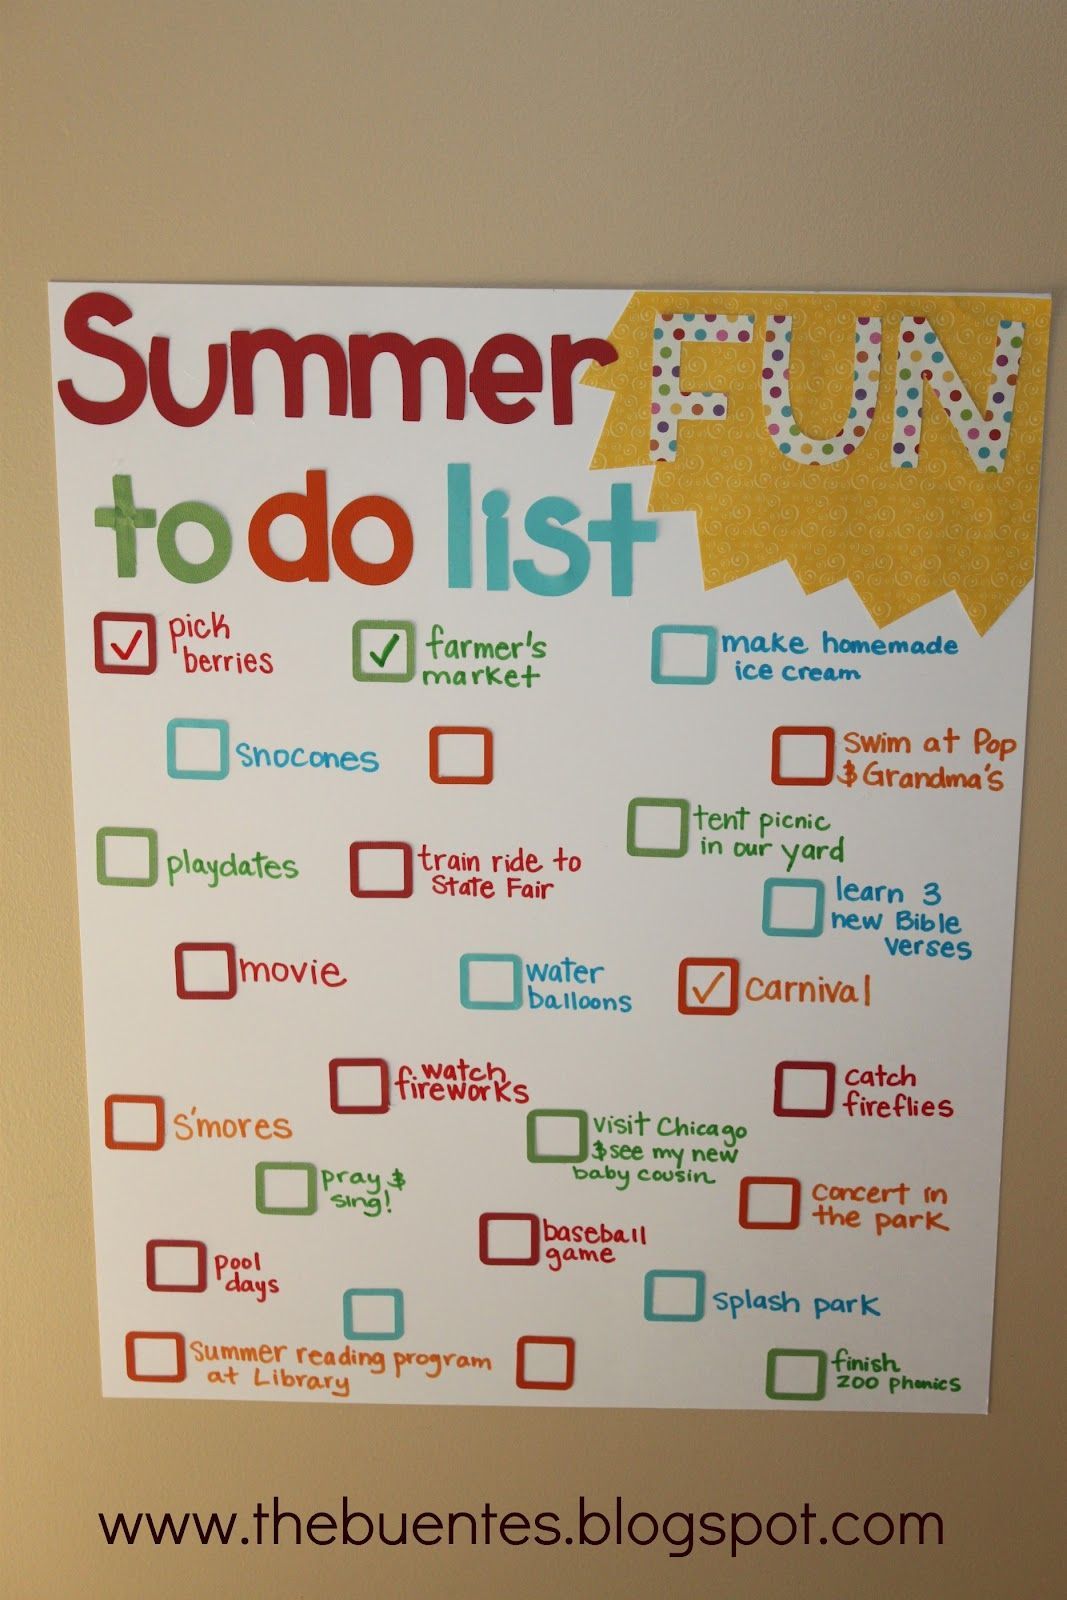 A way for the kids to keep parents accountable for summer plans!   LOVE it!